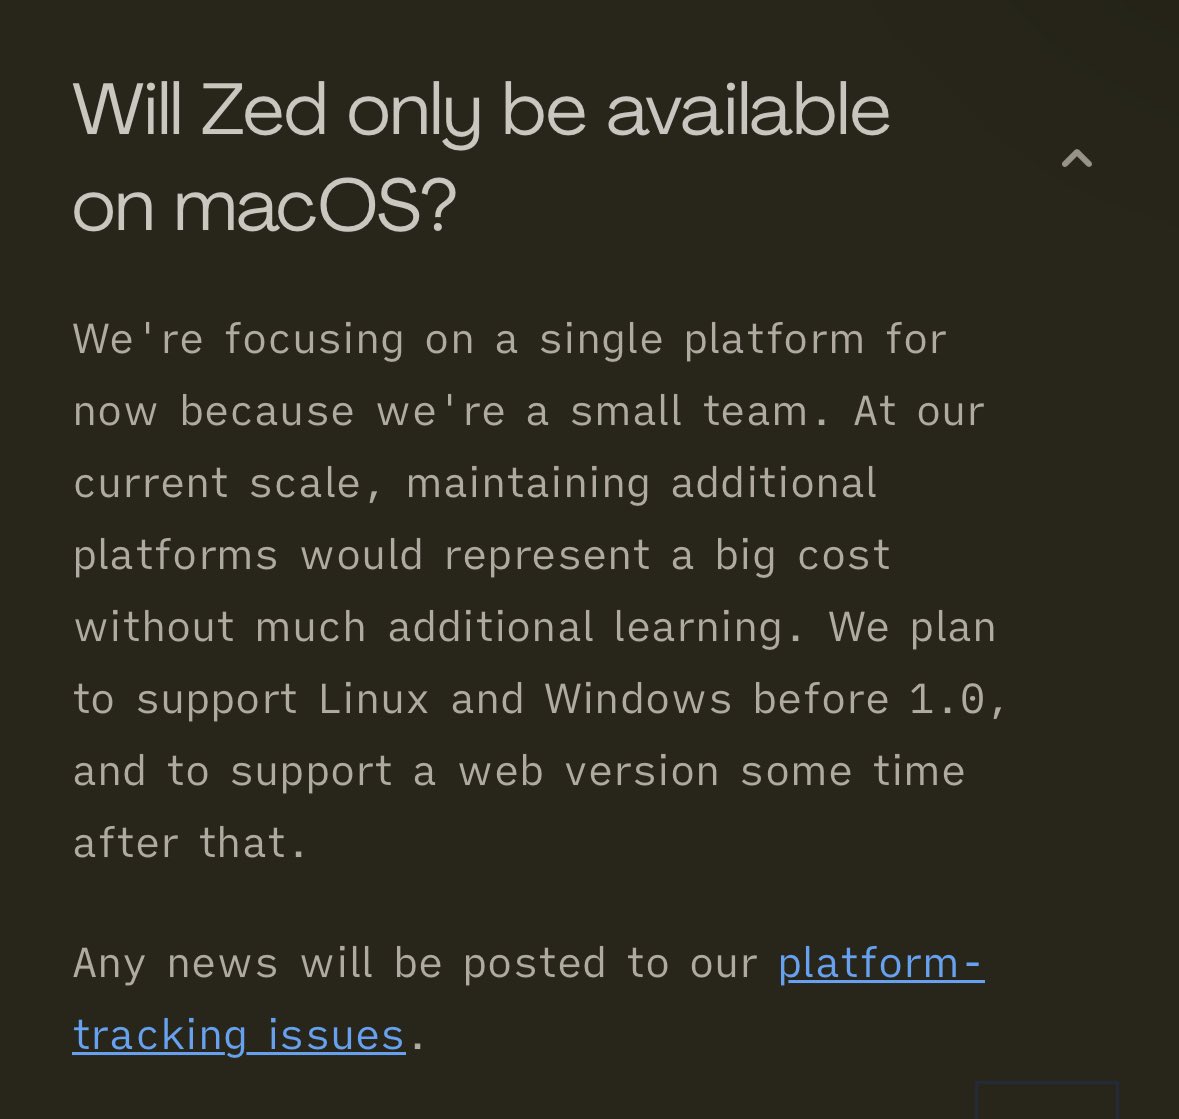 @RicoTweet @zeddotdev Not these guys 🤷🏻‍♂️
I feel like a 'small team' could've shipped the product by now if they didn't feel the need to invent a new bespoke magical way of rendering a sidebar and a text field but idk I'm just some dude